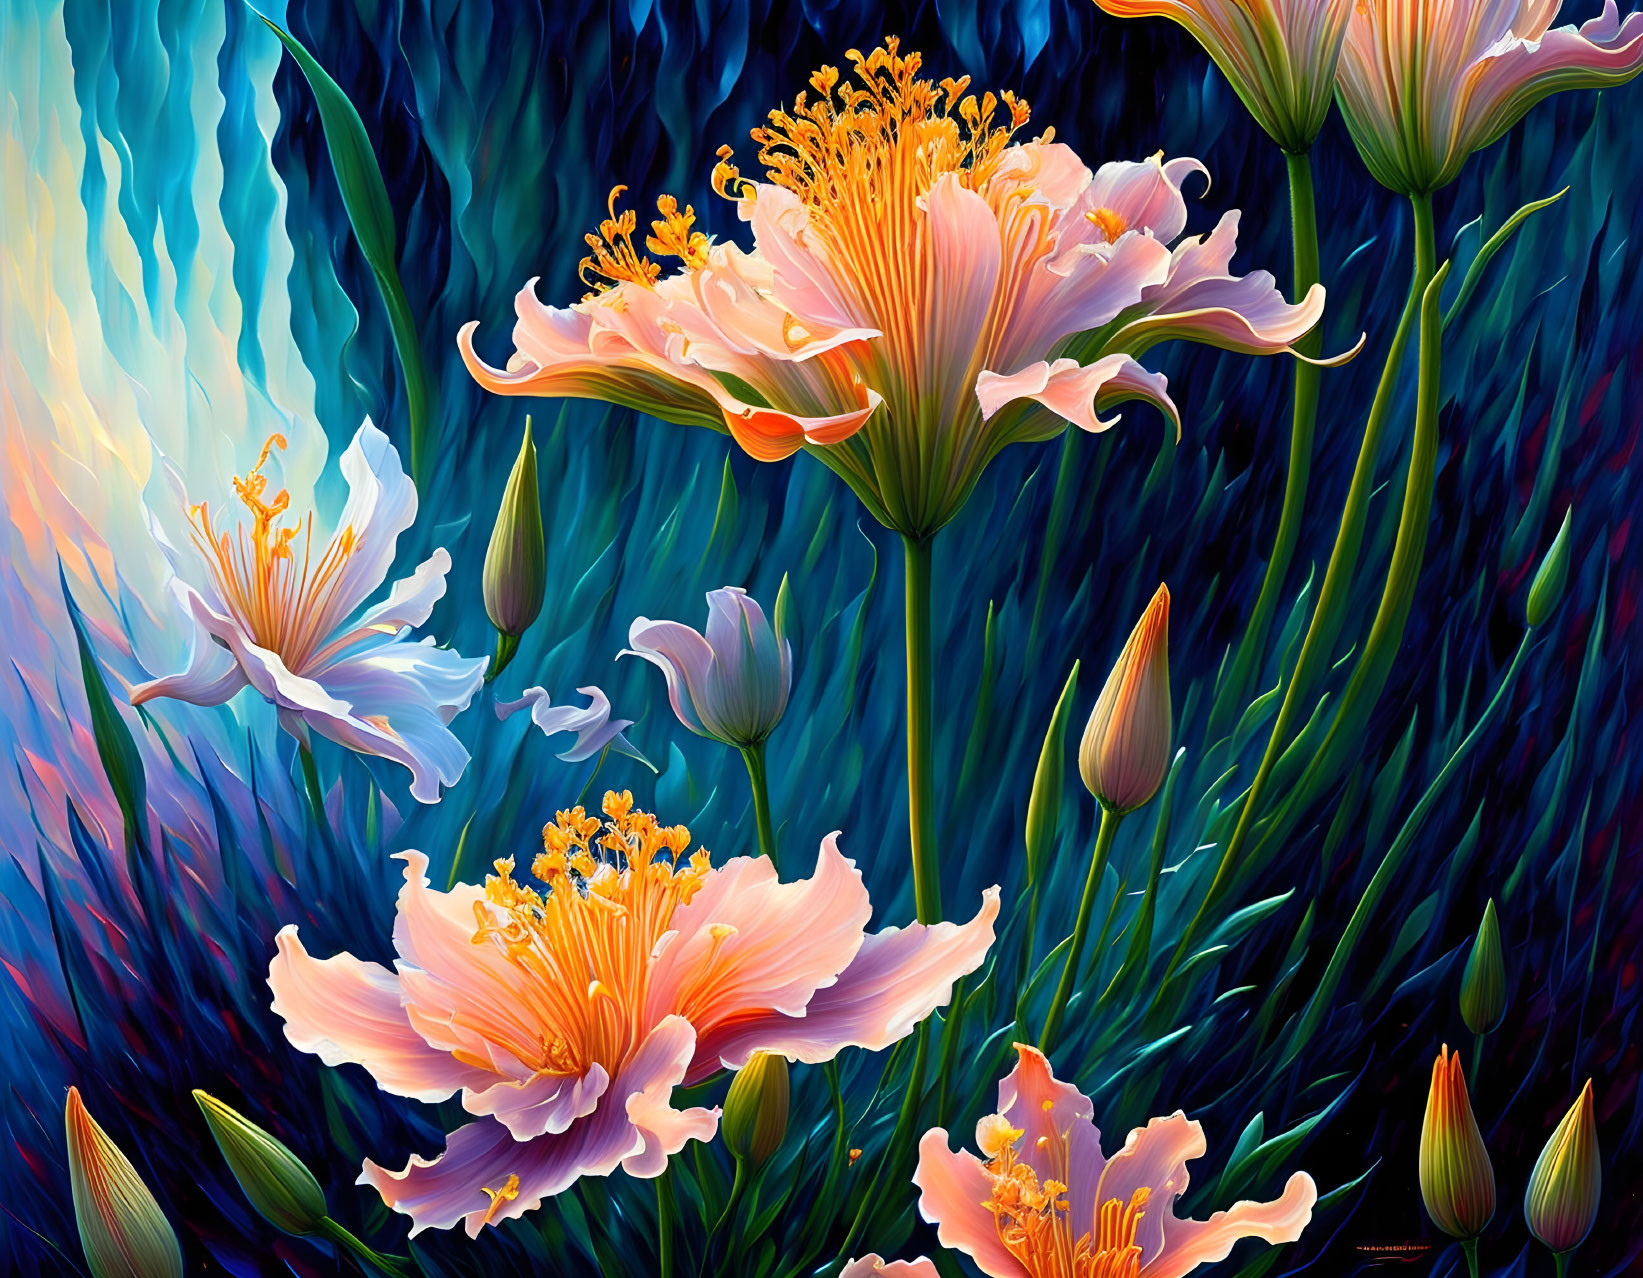 Colorful digital artwork featuring whimsical flowers with exaggerated stamens